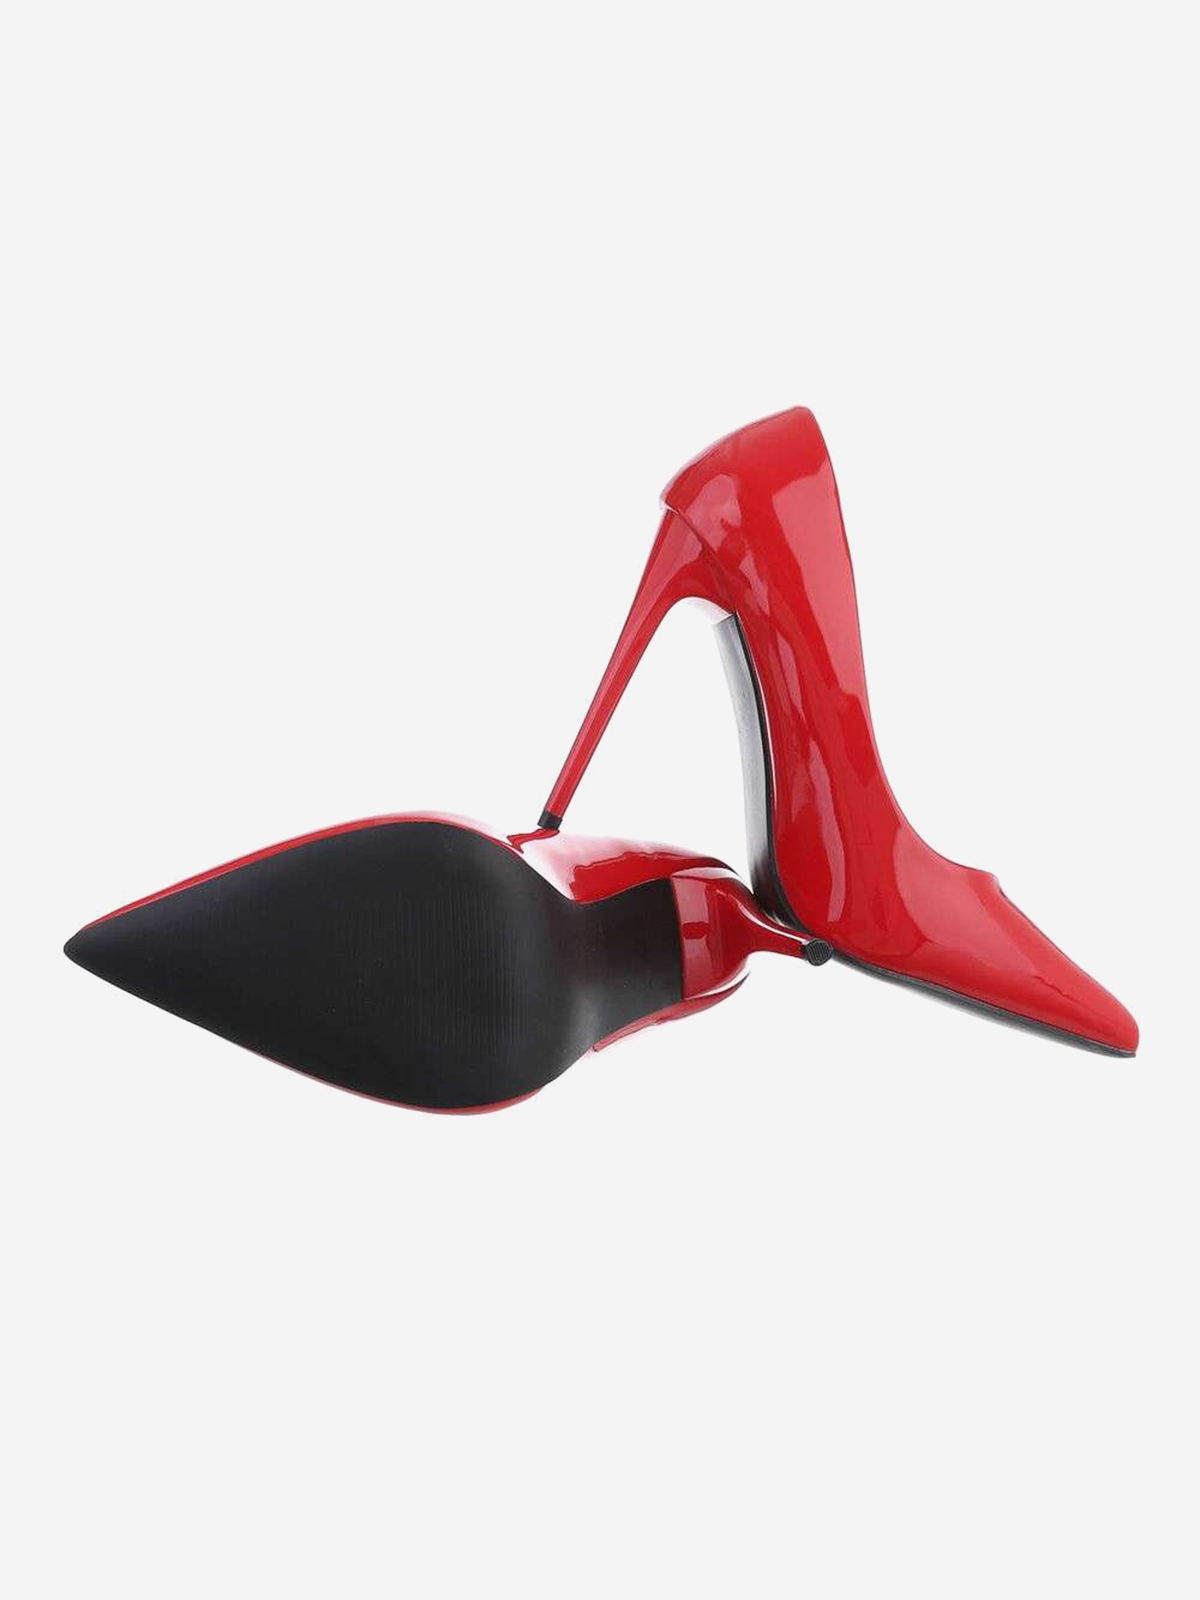 Women's high-heeled shoes in red